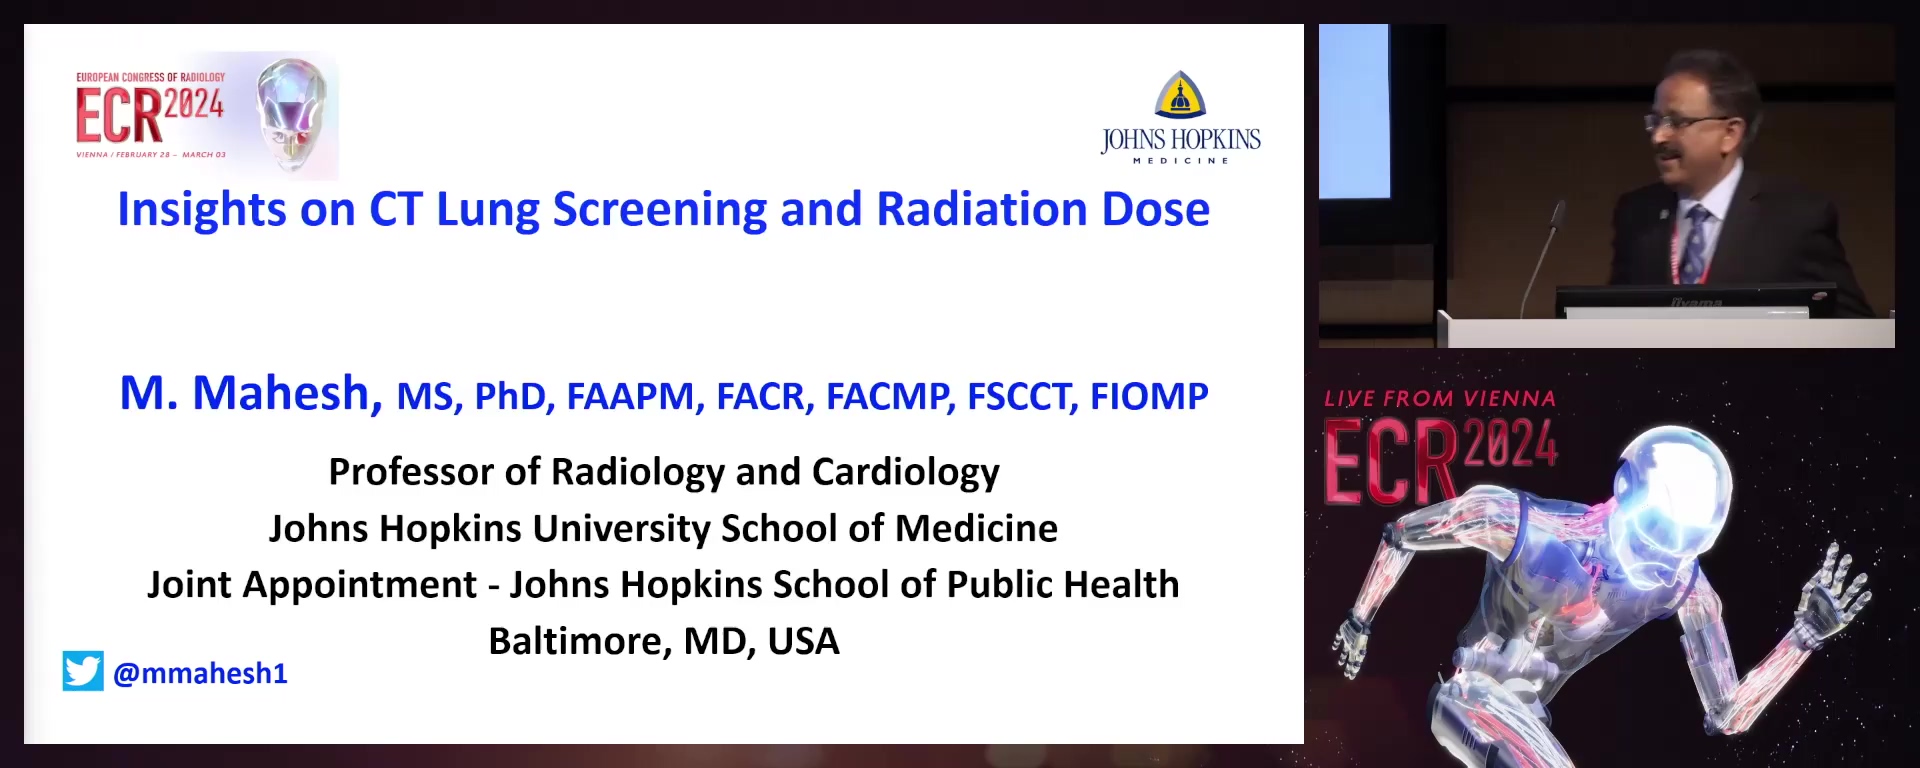 Insights on CT lung screening and radiation dose